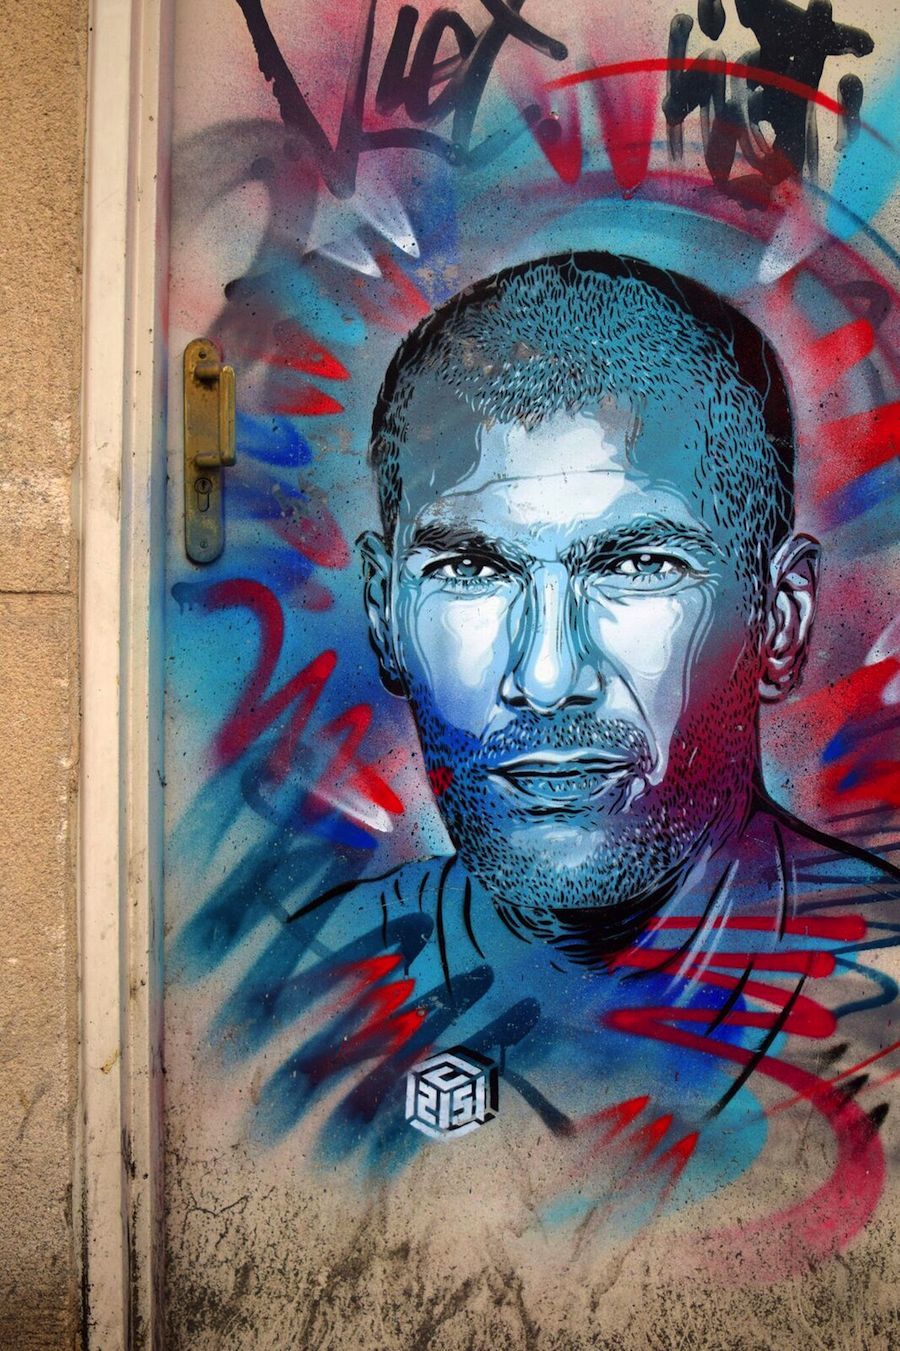 New C215 Exhibition About Athletes in Nice, France-23